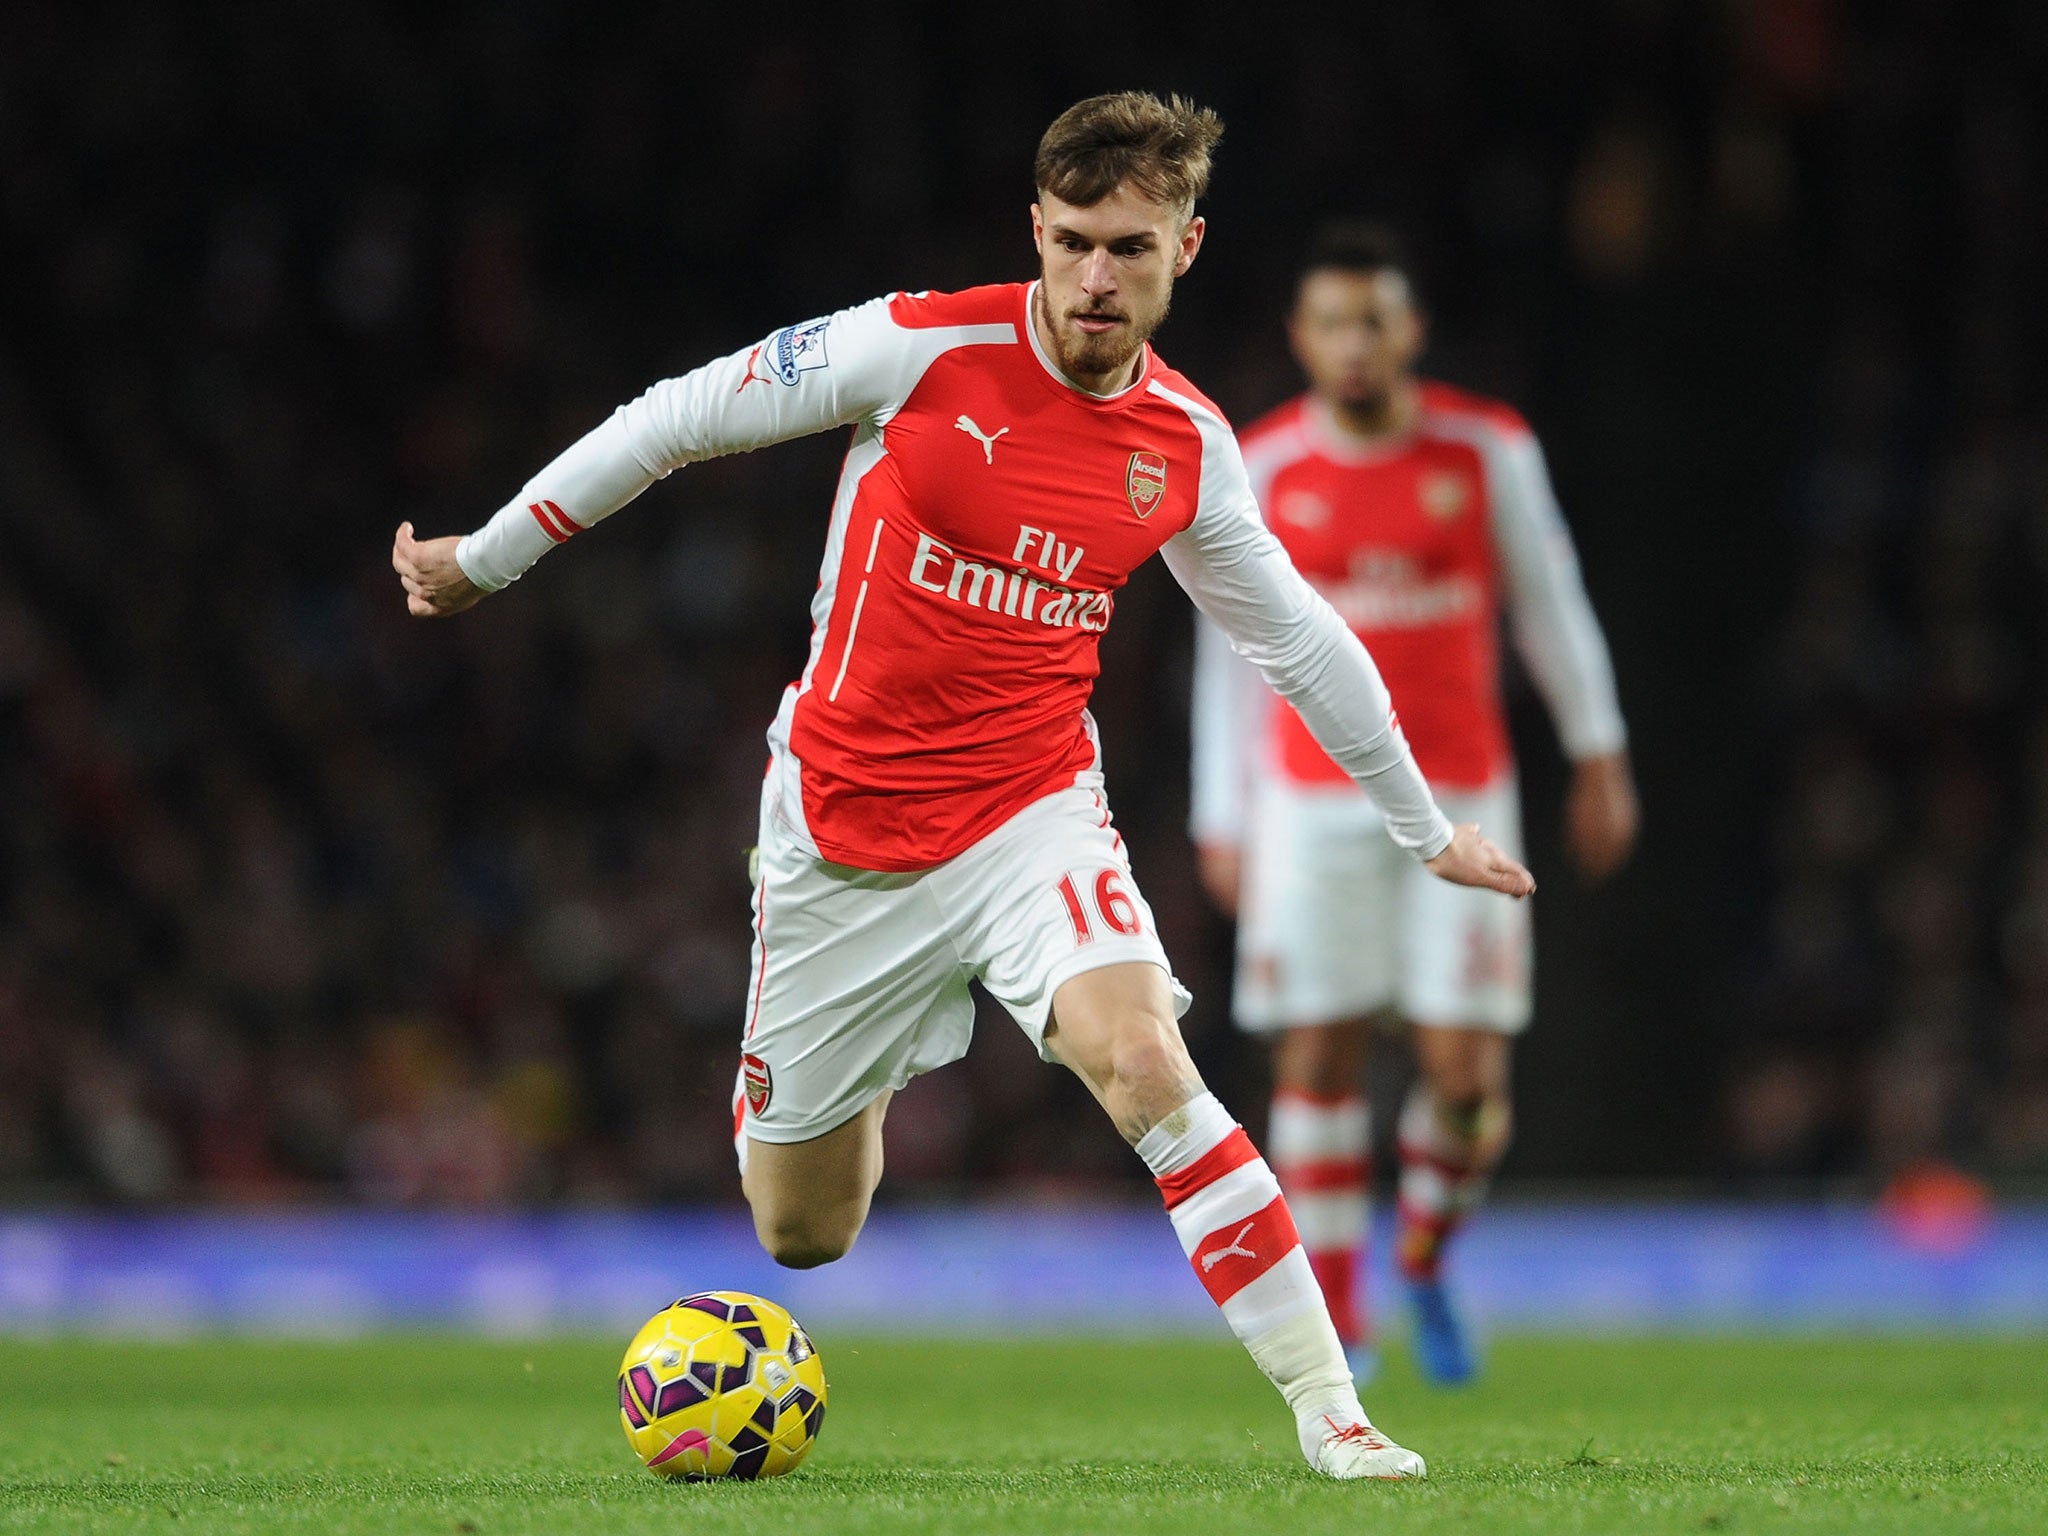 Aaron Ramsey suffered a third hamstring injury of the season in the 2-1 win over Leicester